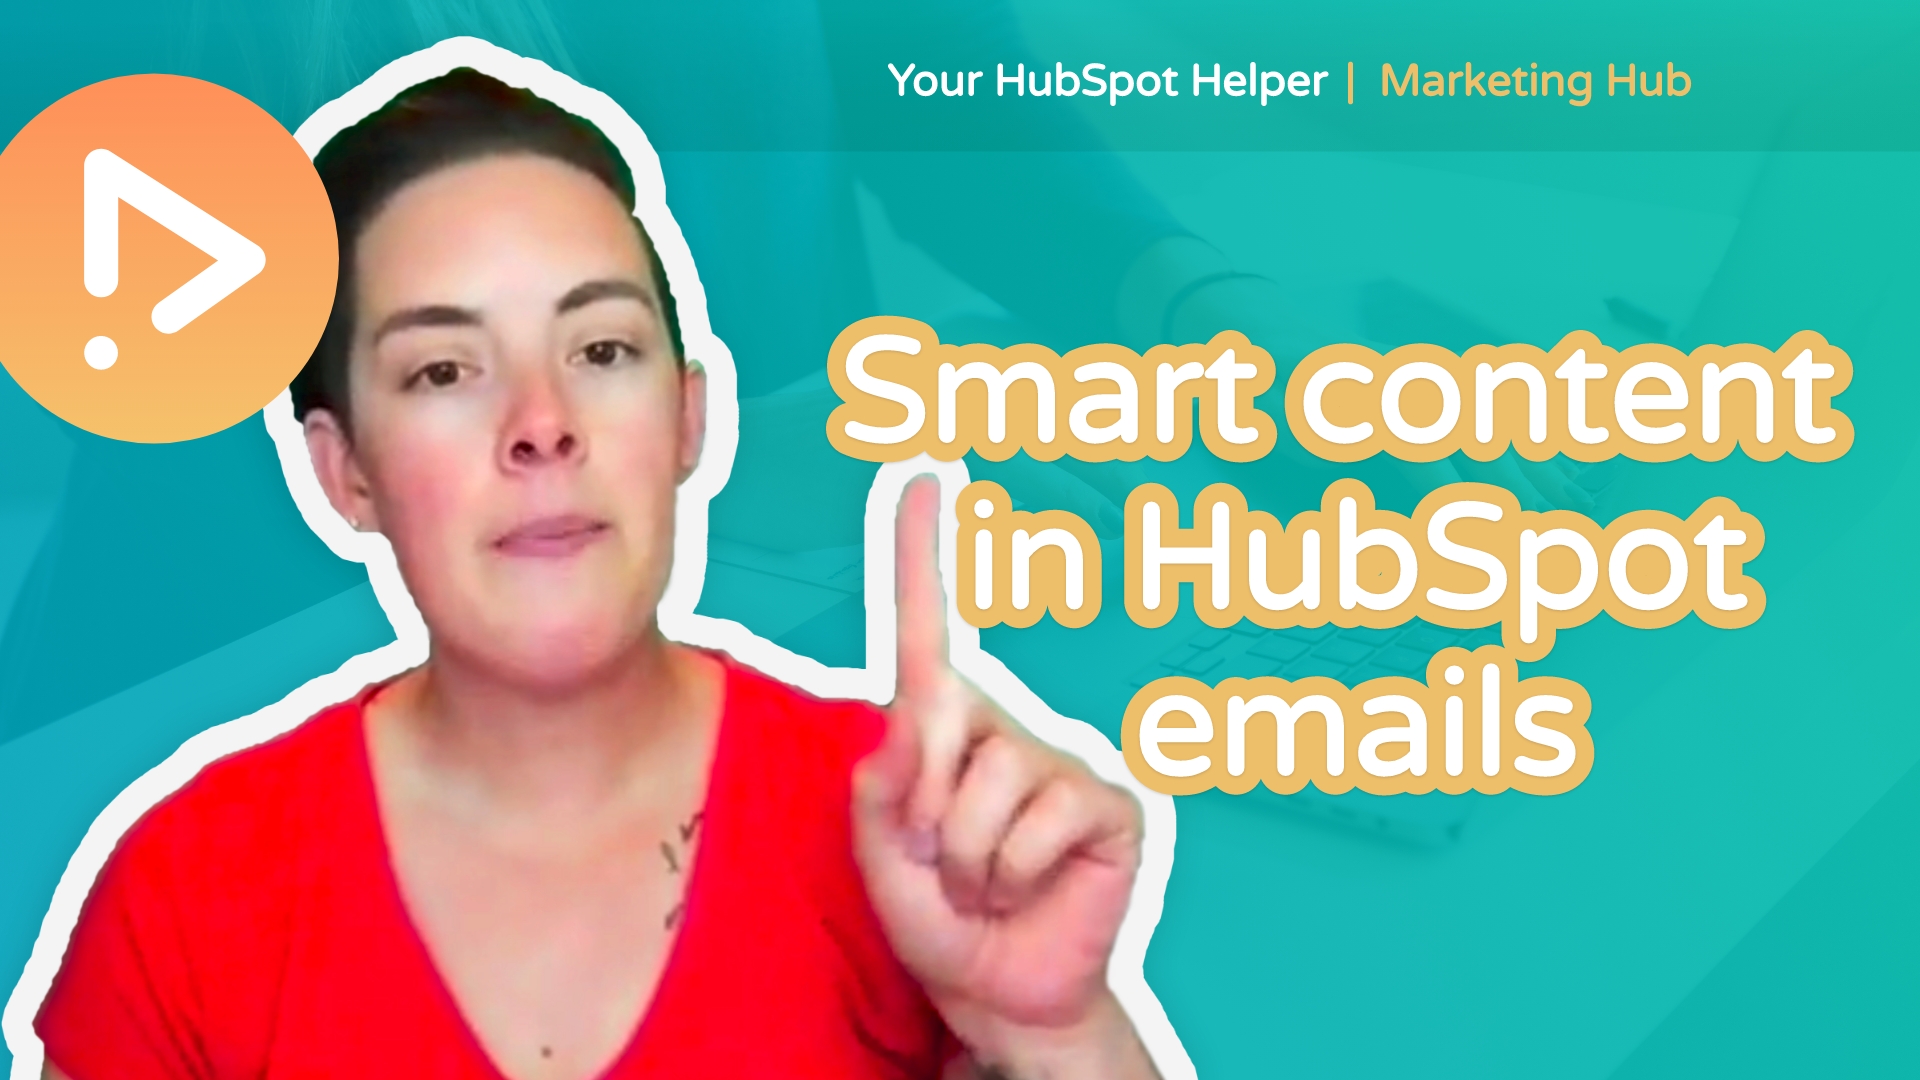 How to use smart content in HubSpot emails